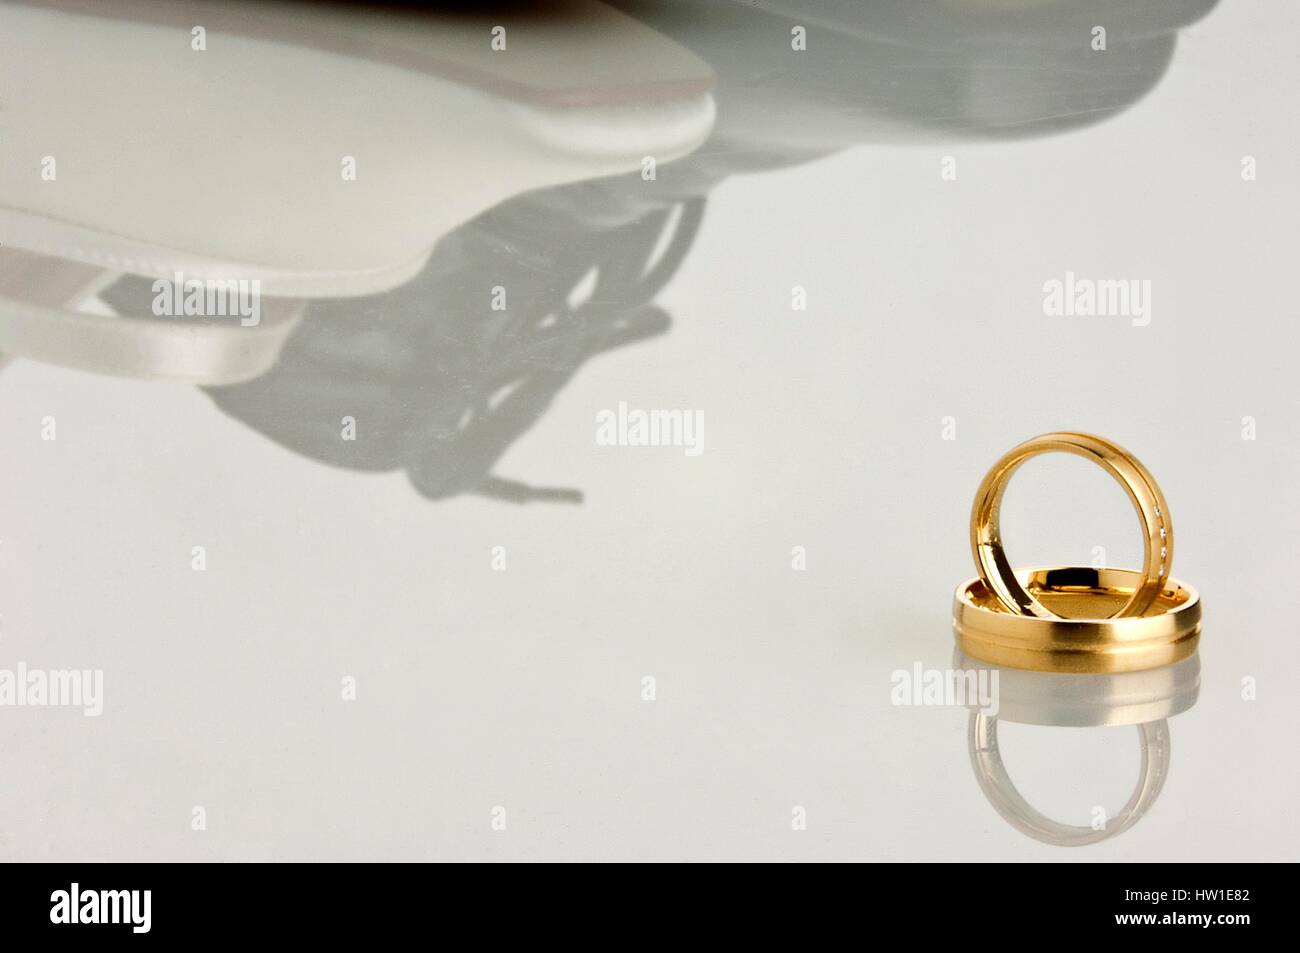 Wedding shoes and rings, Hochzeitsschuhe und Ringe Stock Photo